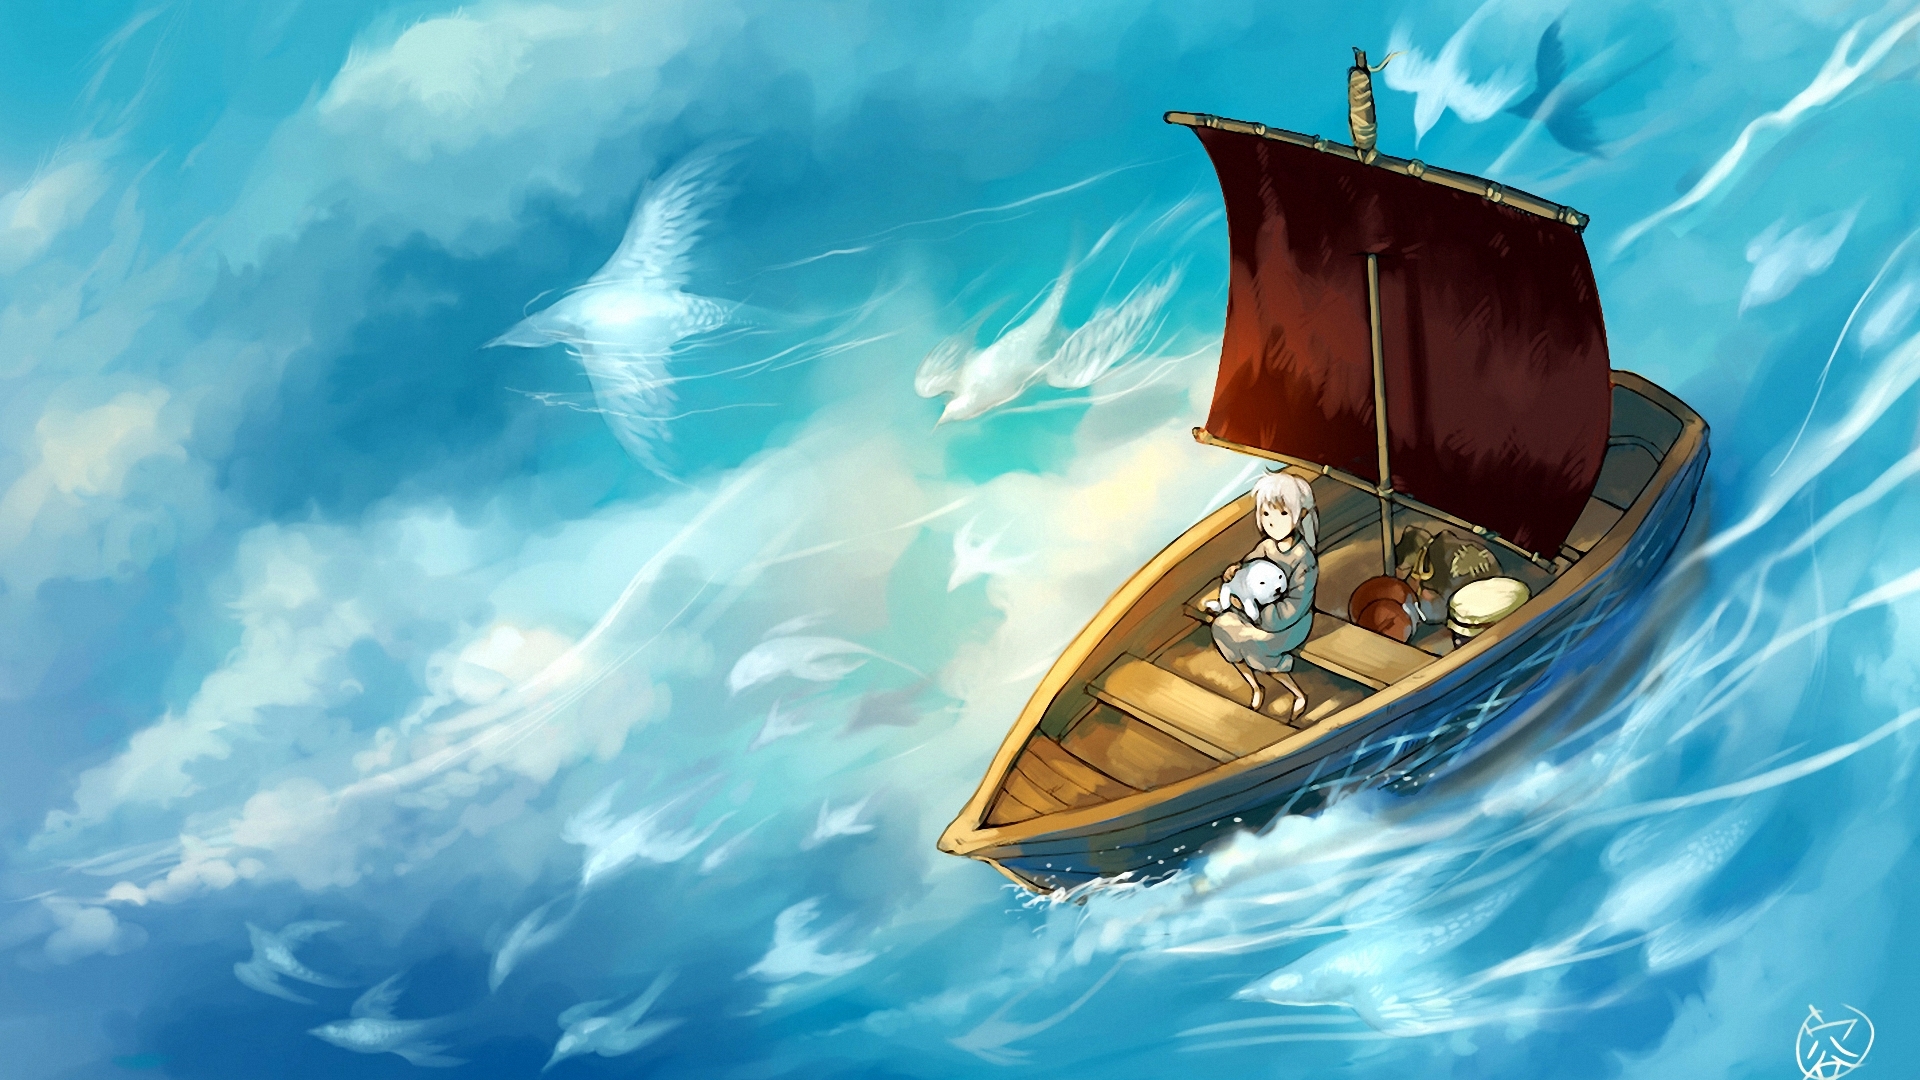 anime wallpaper one piece boat - Google Search | Animes wallpapers, Anime,  Personagens de anime